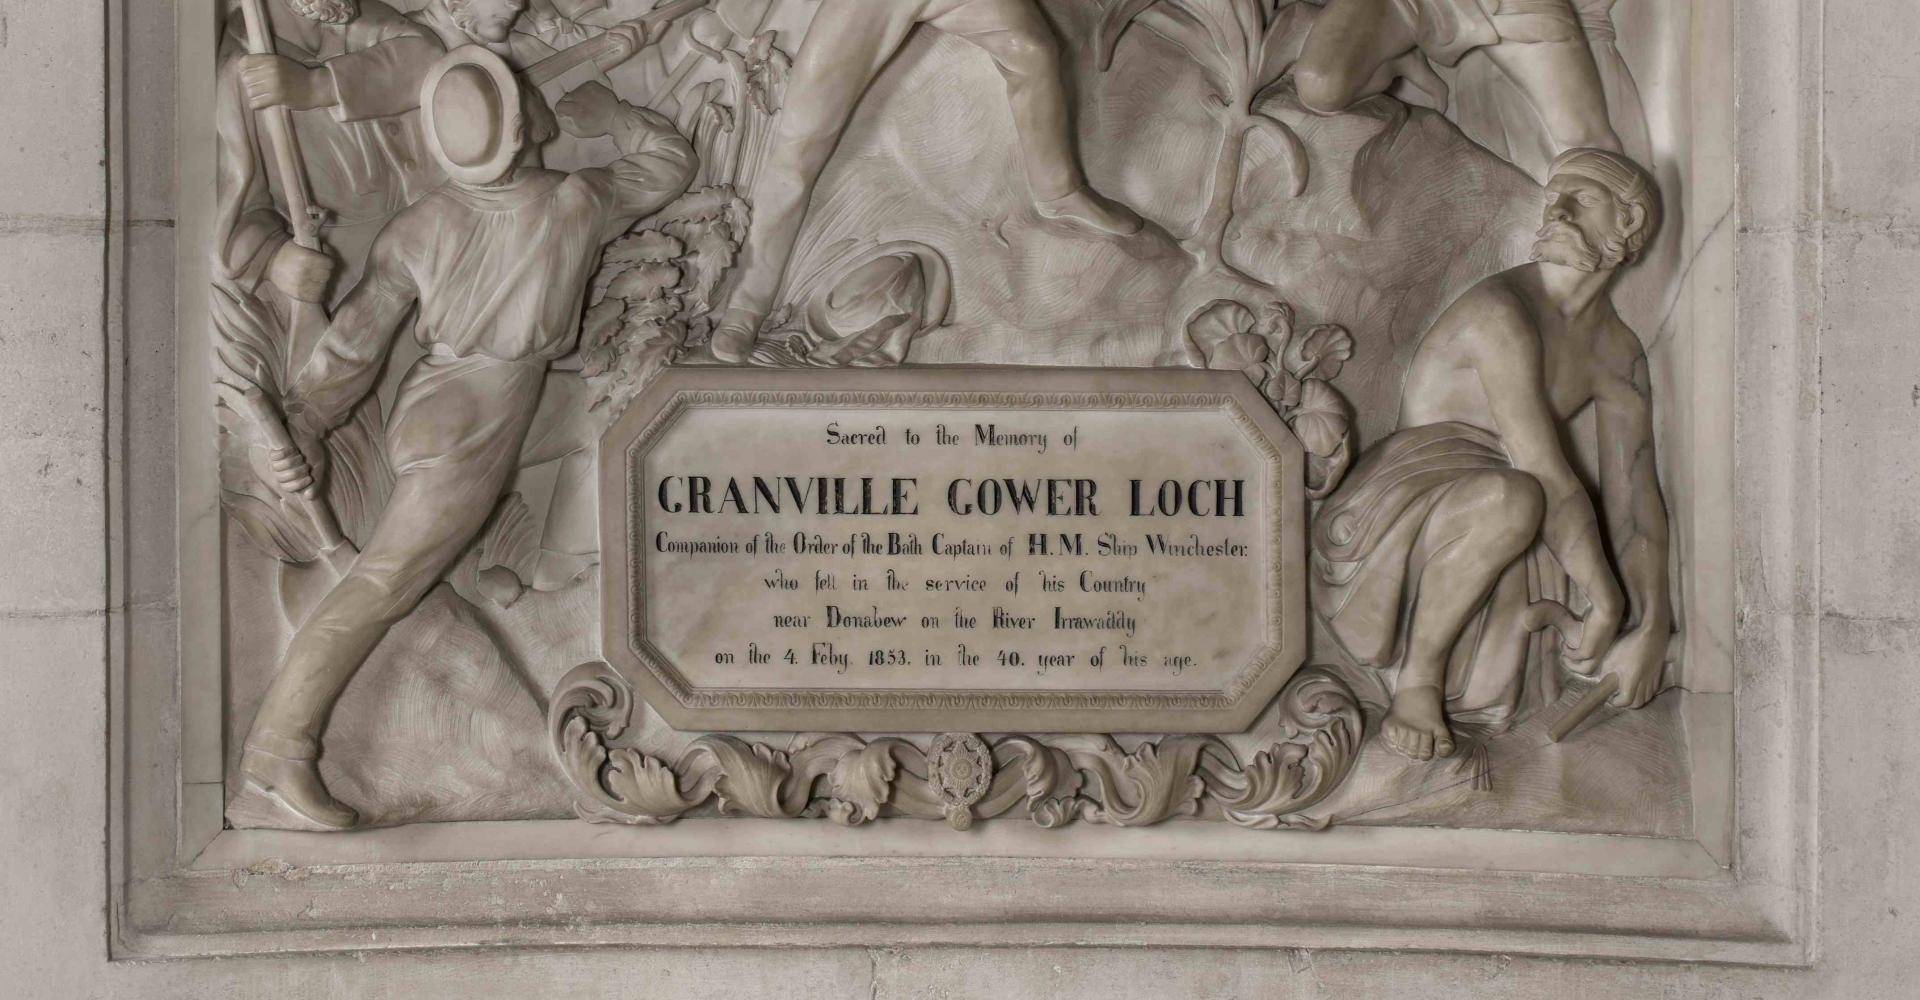 Monument to Granville Gower Loch